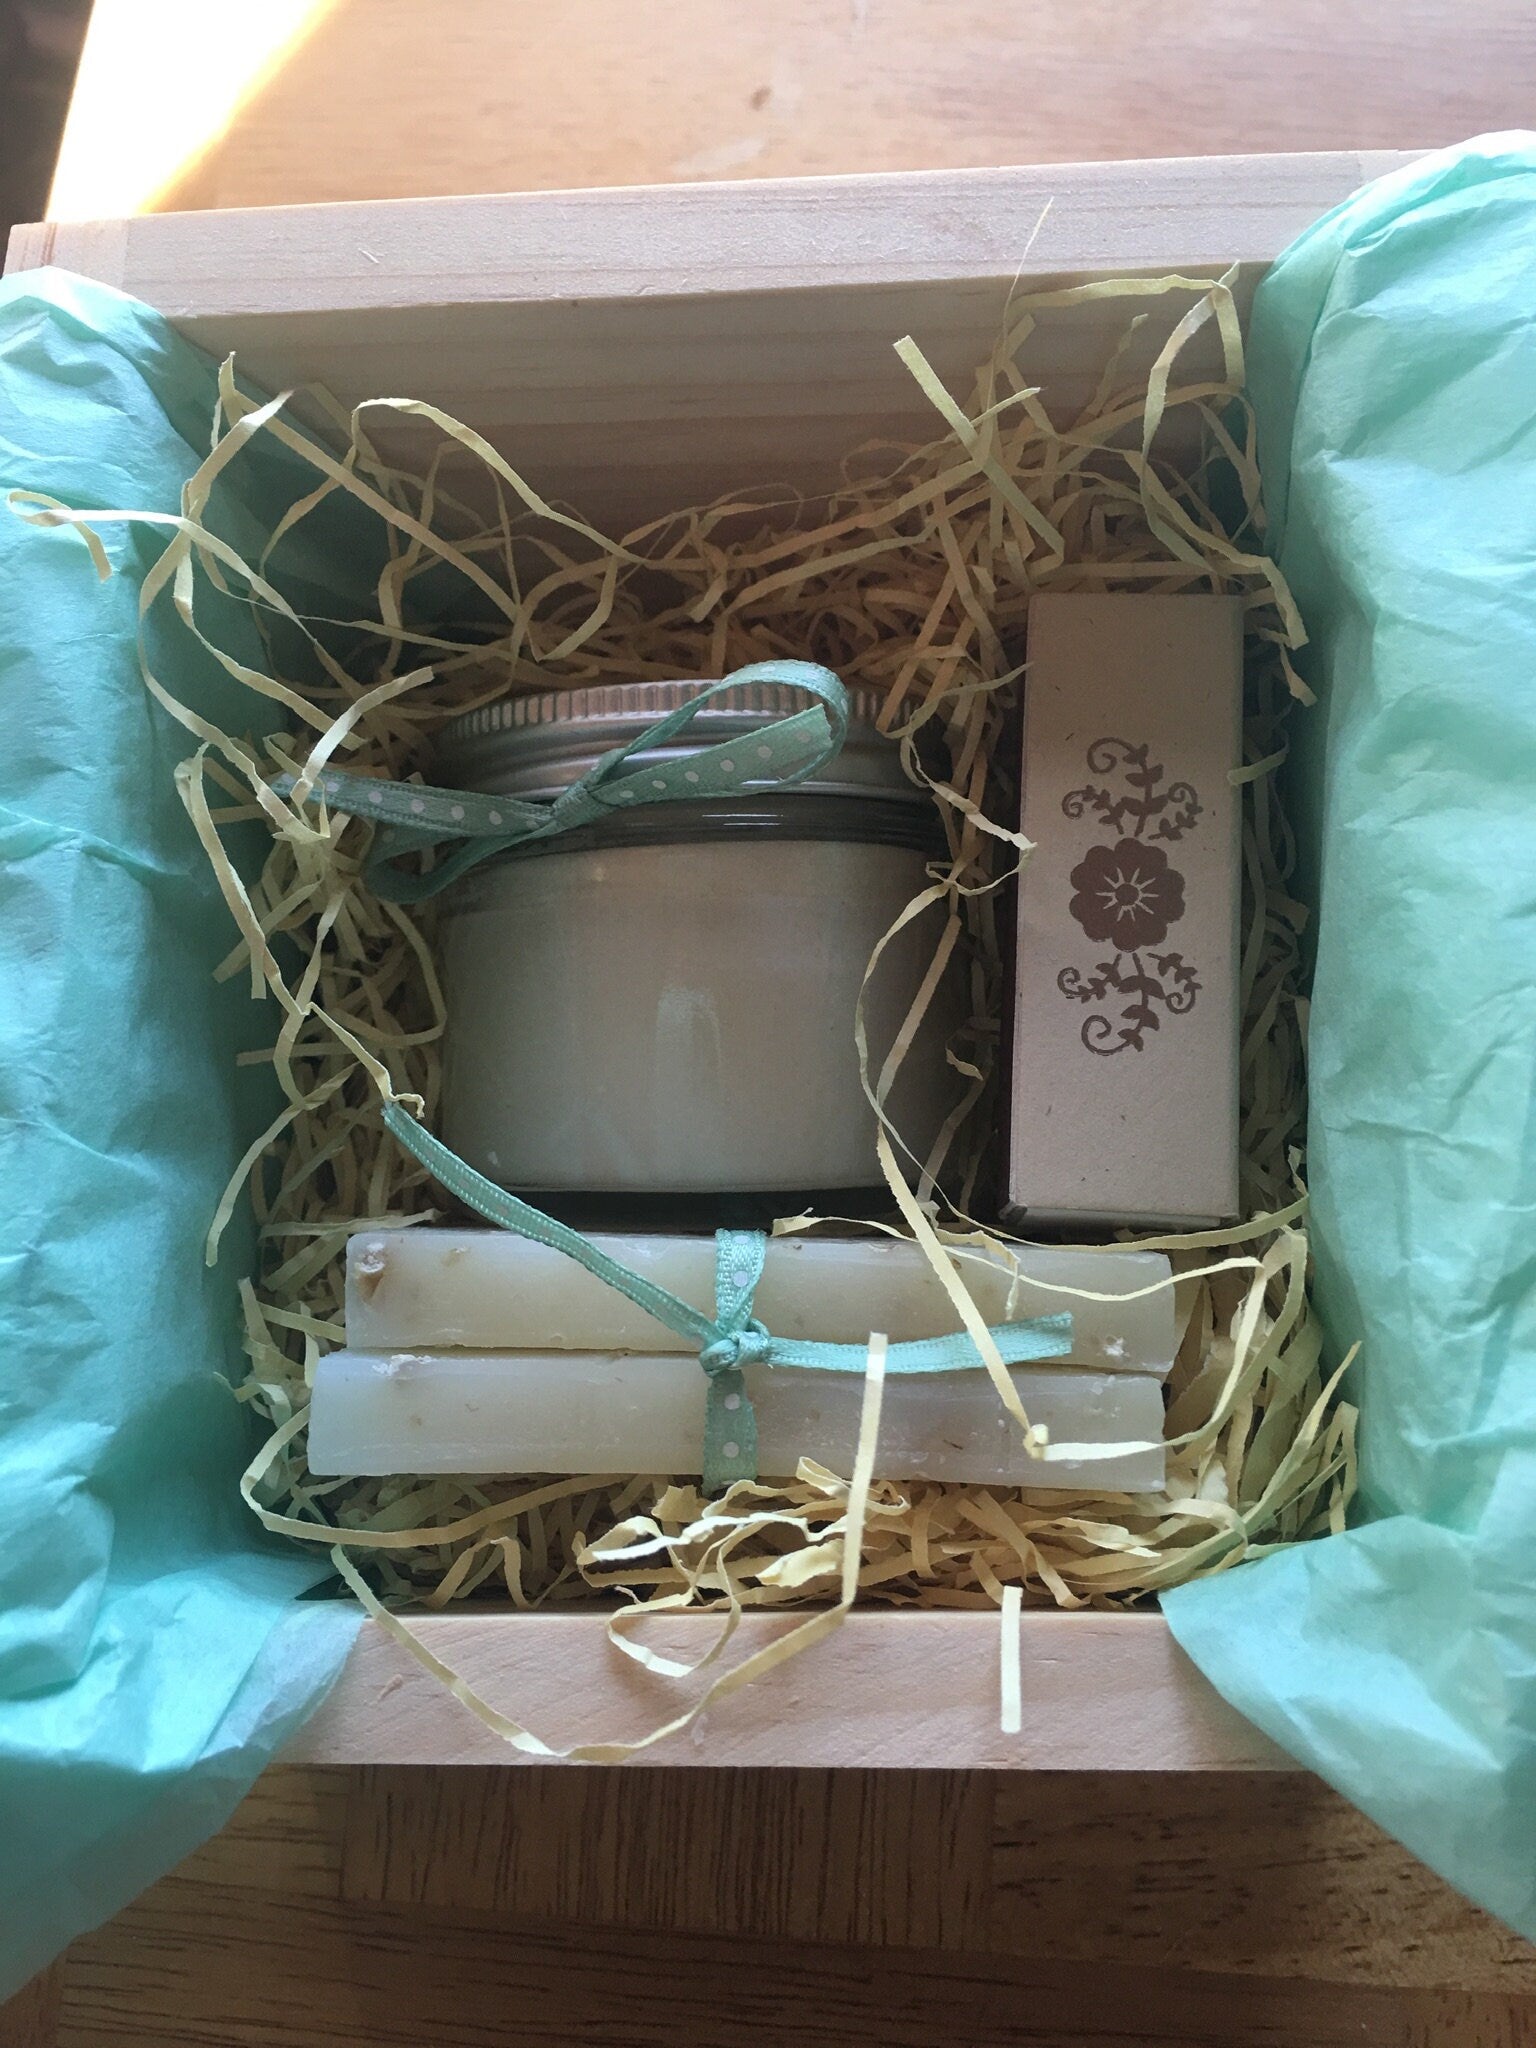 Artisan Soap and Soy Candle Gift Set in Vermont Wooden Box -Bridal Party-Hostess Gift--Belle Savon Vermont